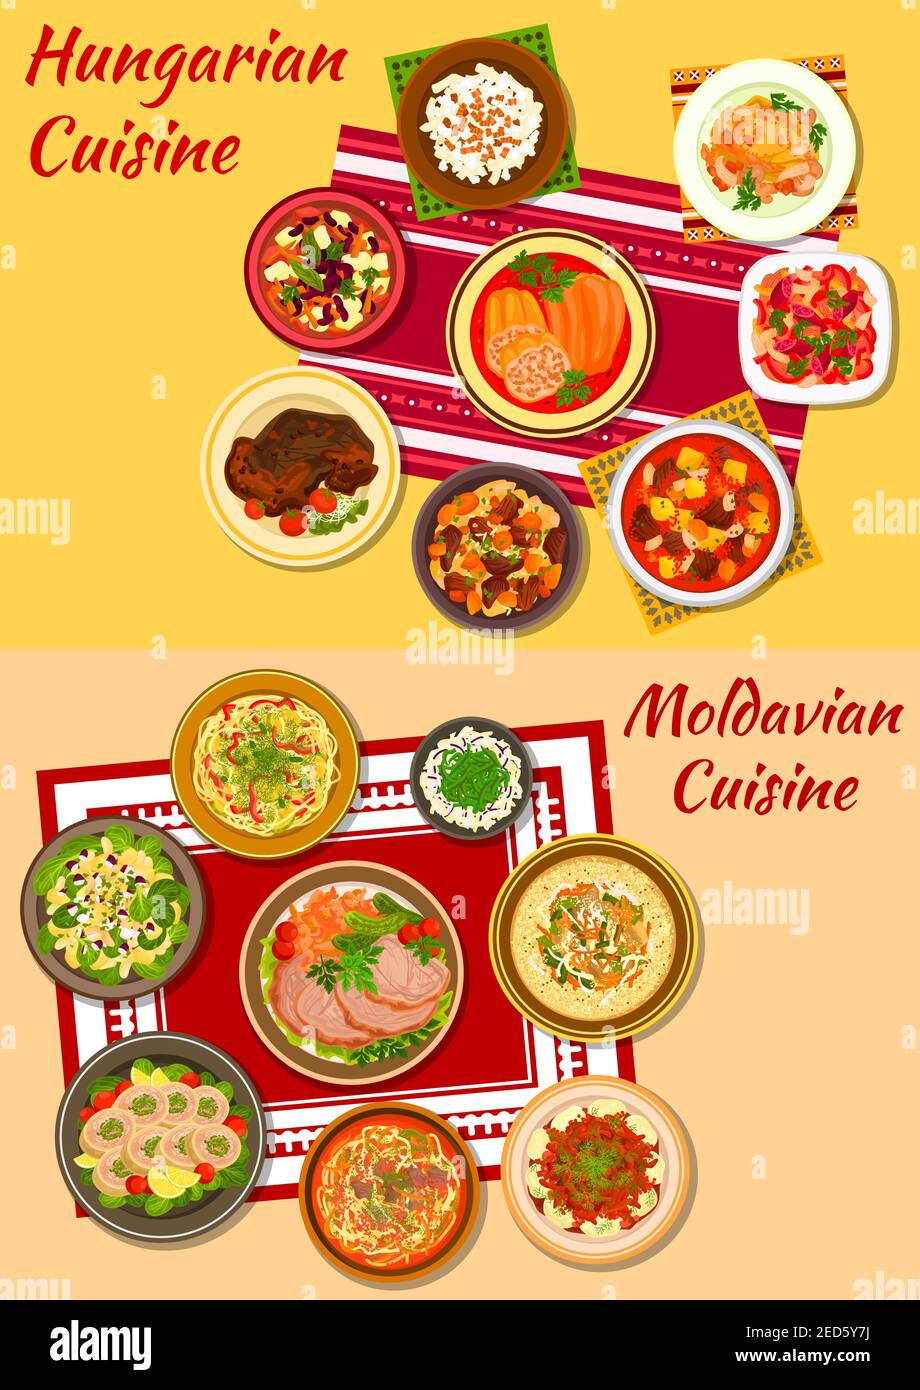 Hungarian and moldavian cuisine icon with rich meat and vegetable stews, baked pork, stuffed papper, noodles, dumpling and vegetable salads, chicken p Stock Vector